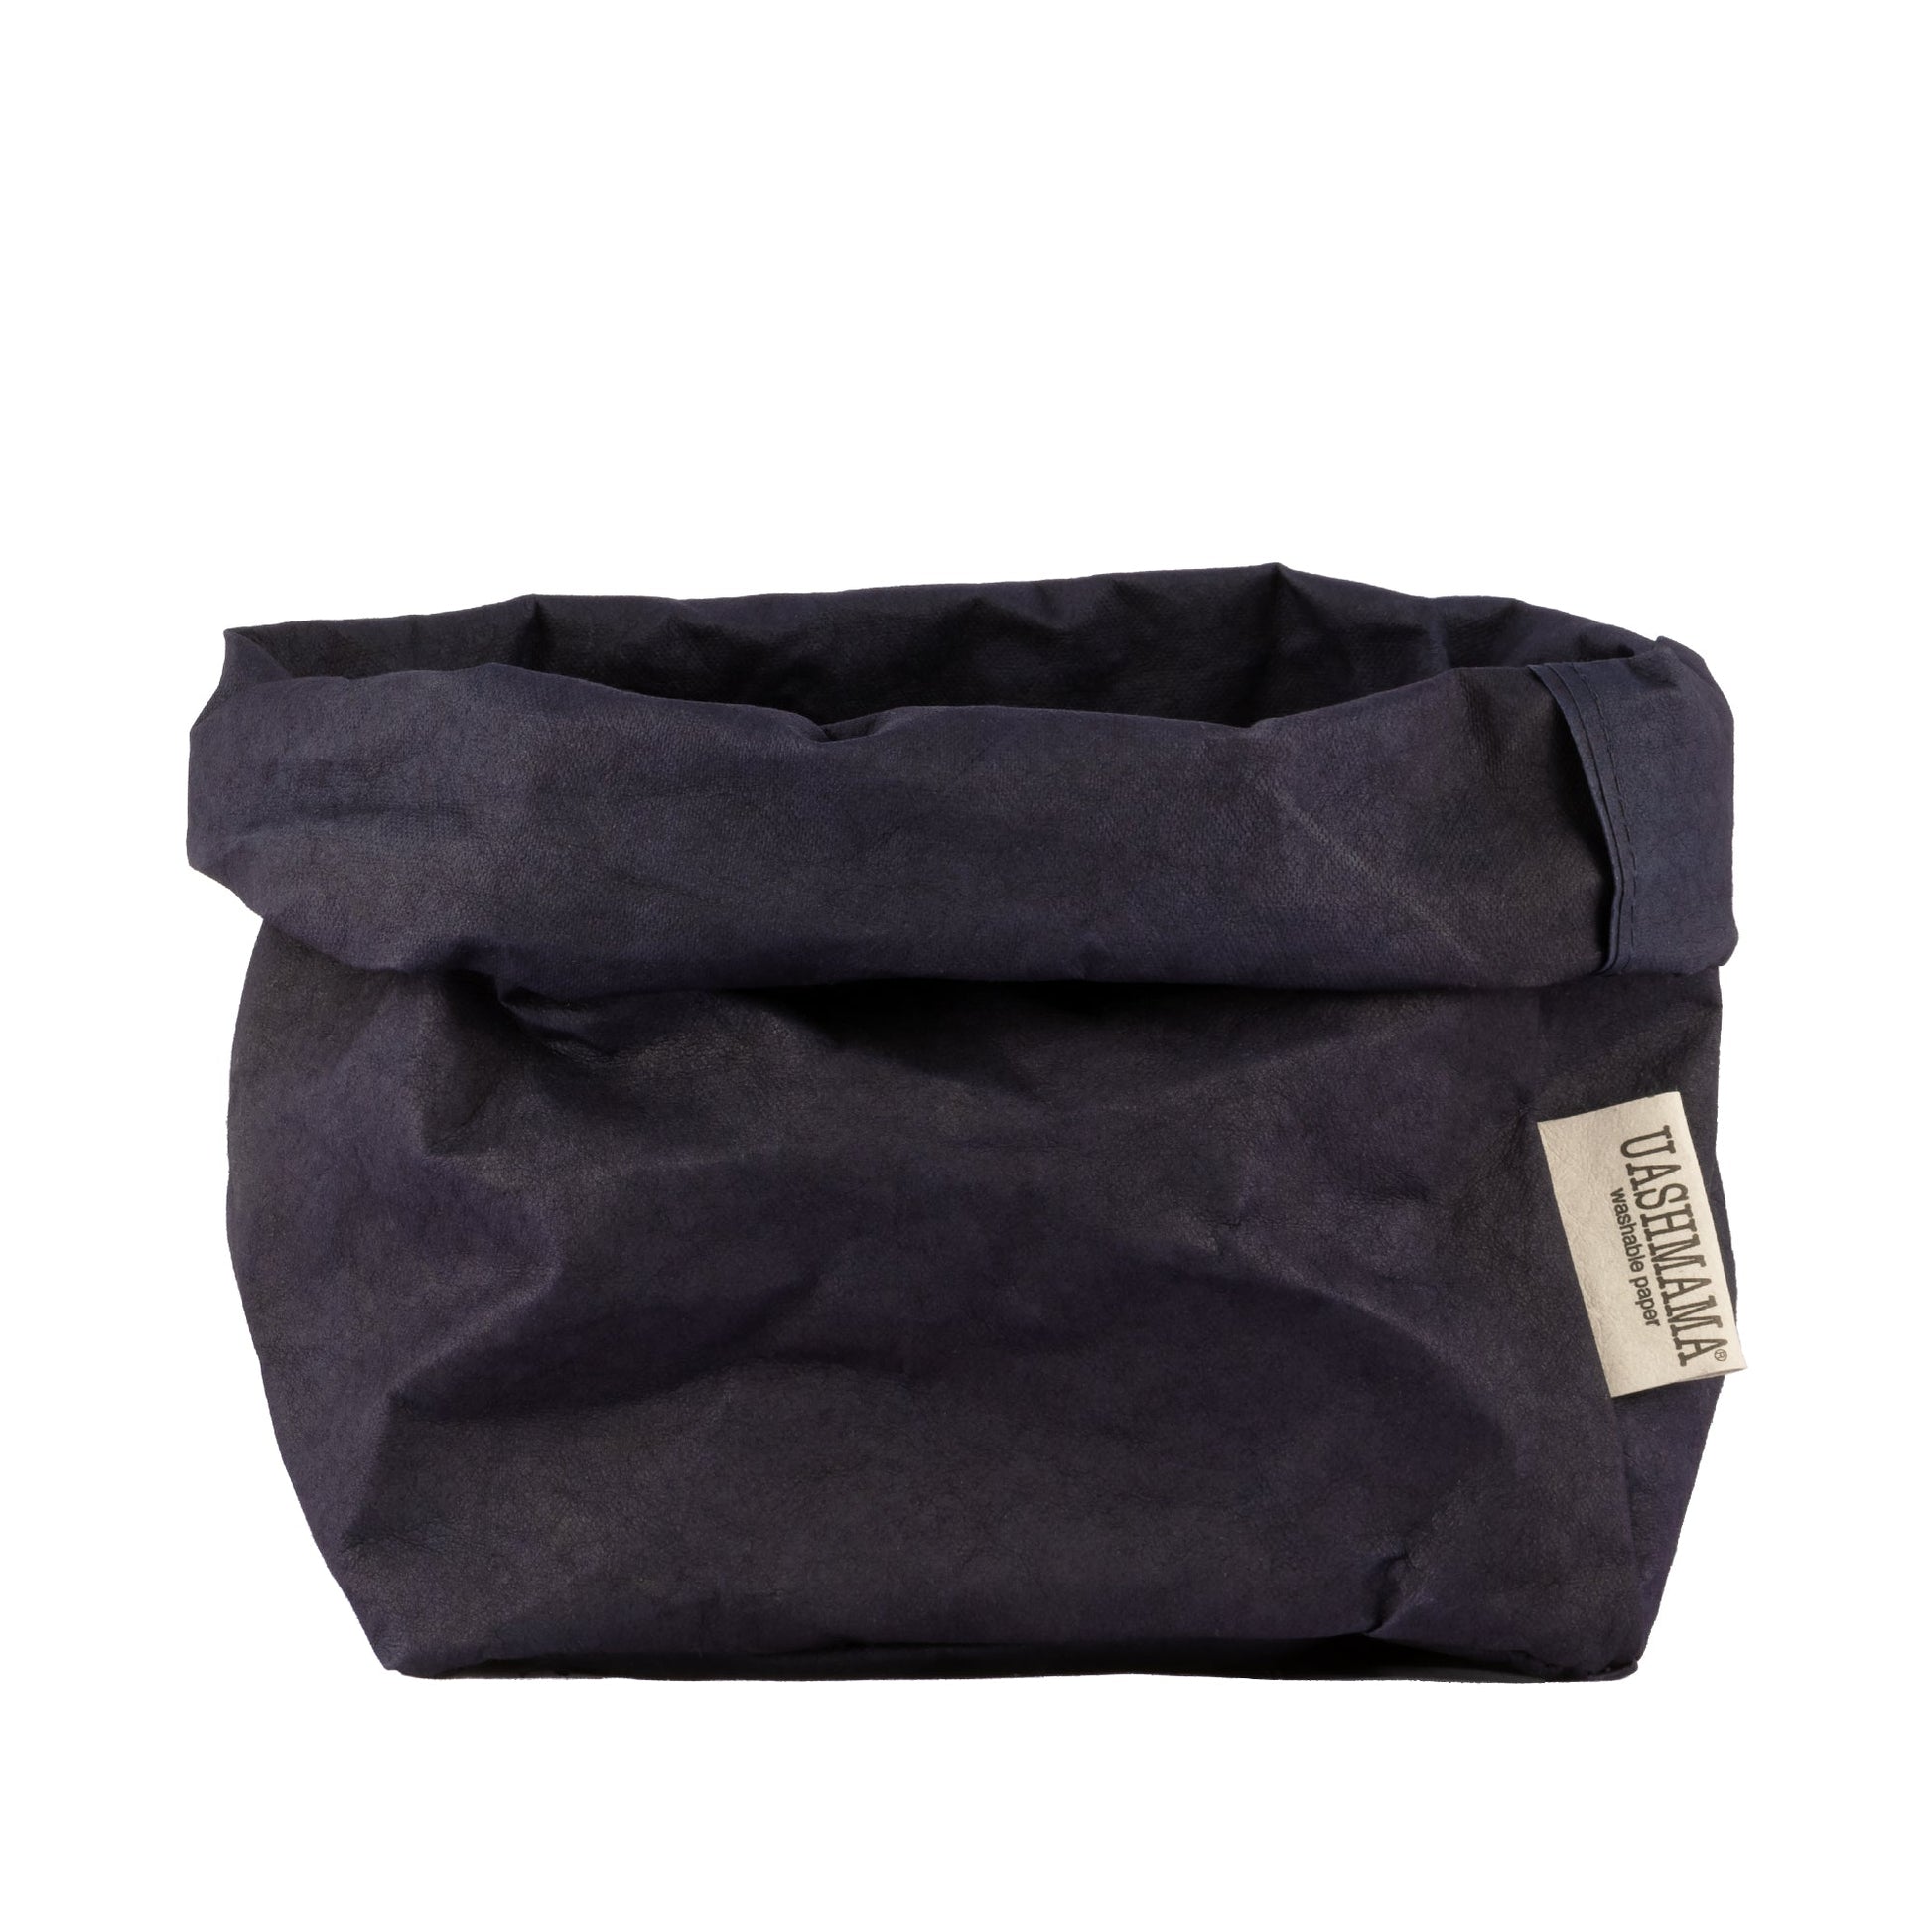 A washable paper bag is shown. The bag is rolled down at the top and features a UASHMAMA logo label on the bottom left corner. The bag pictured is the large size in dark blue.